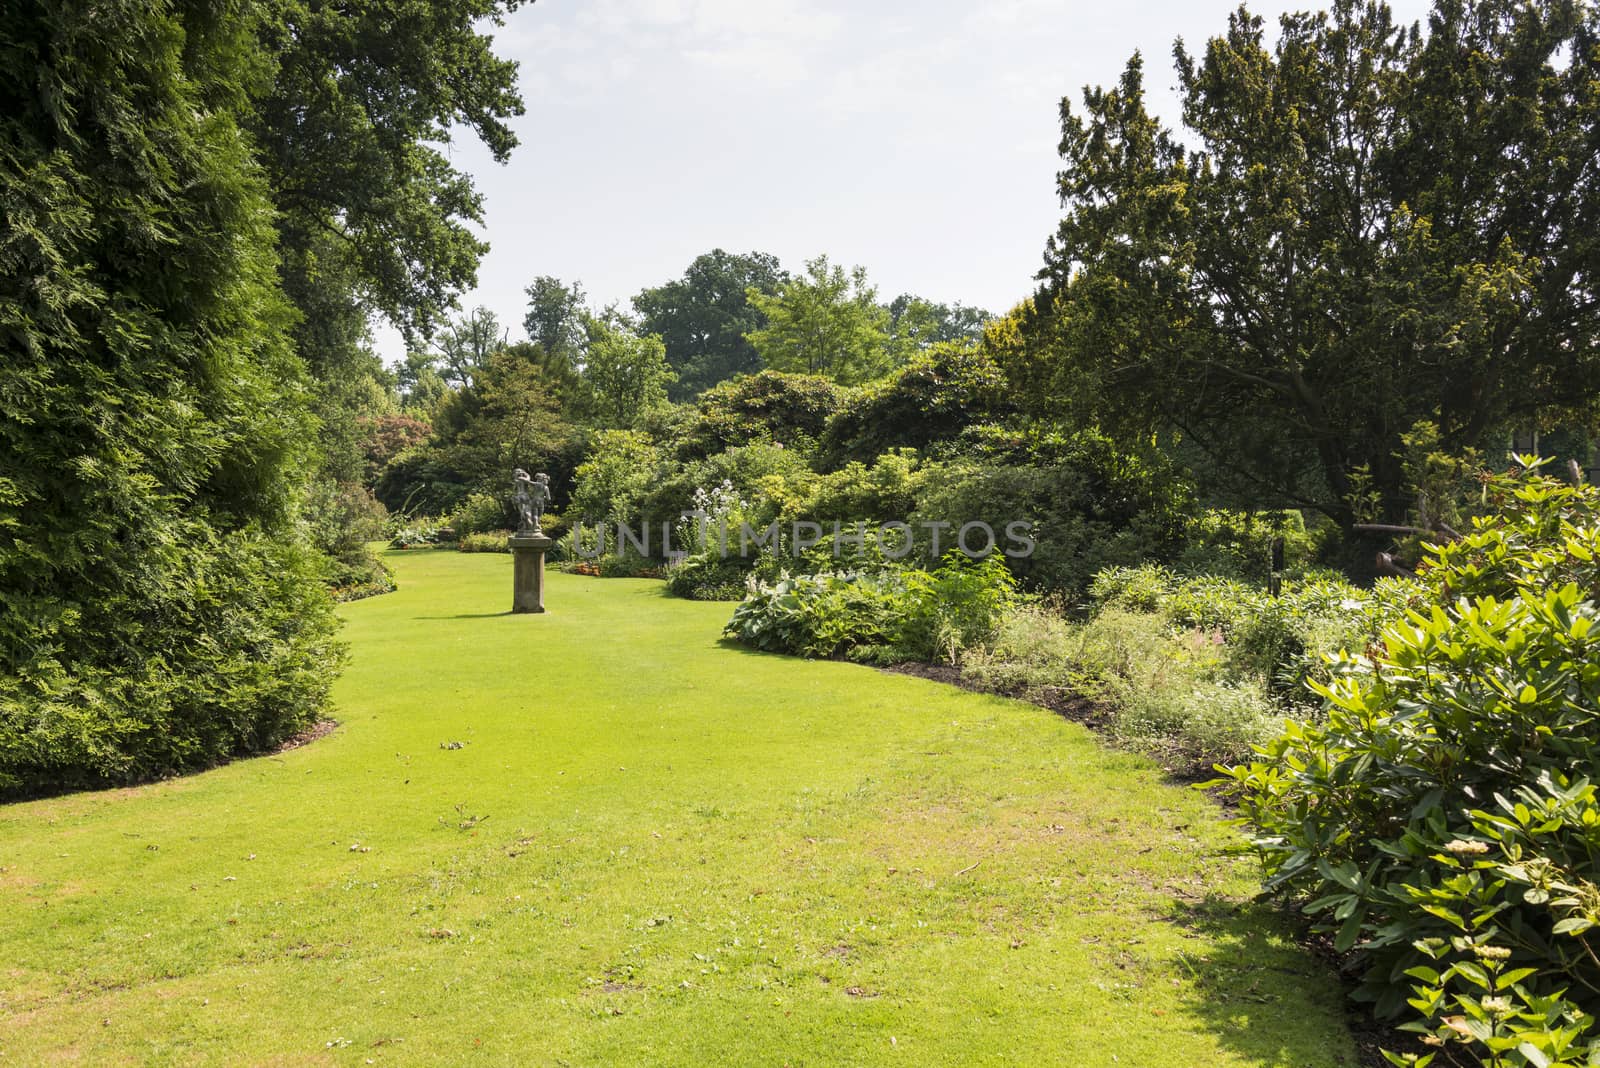 english border green grass garden with trees and plants